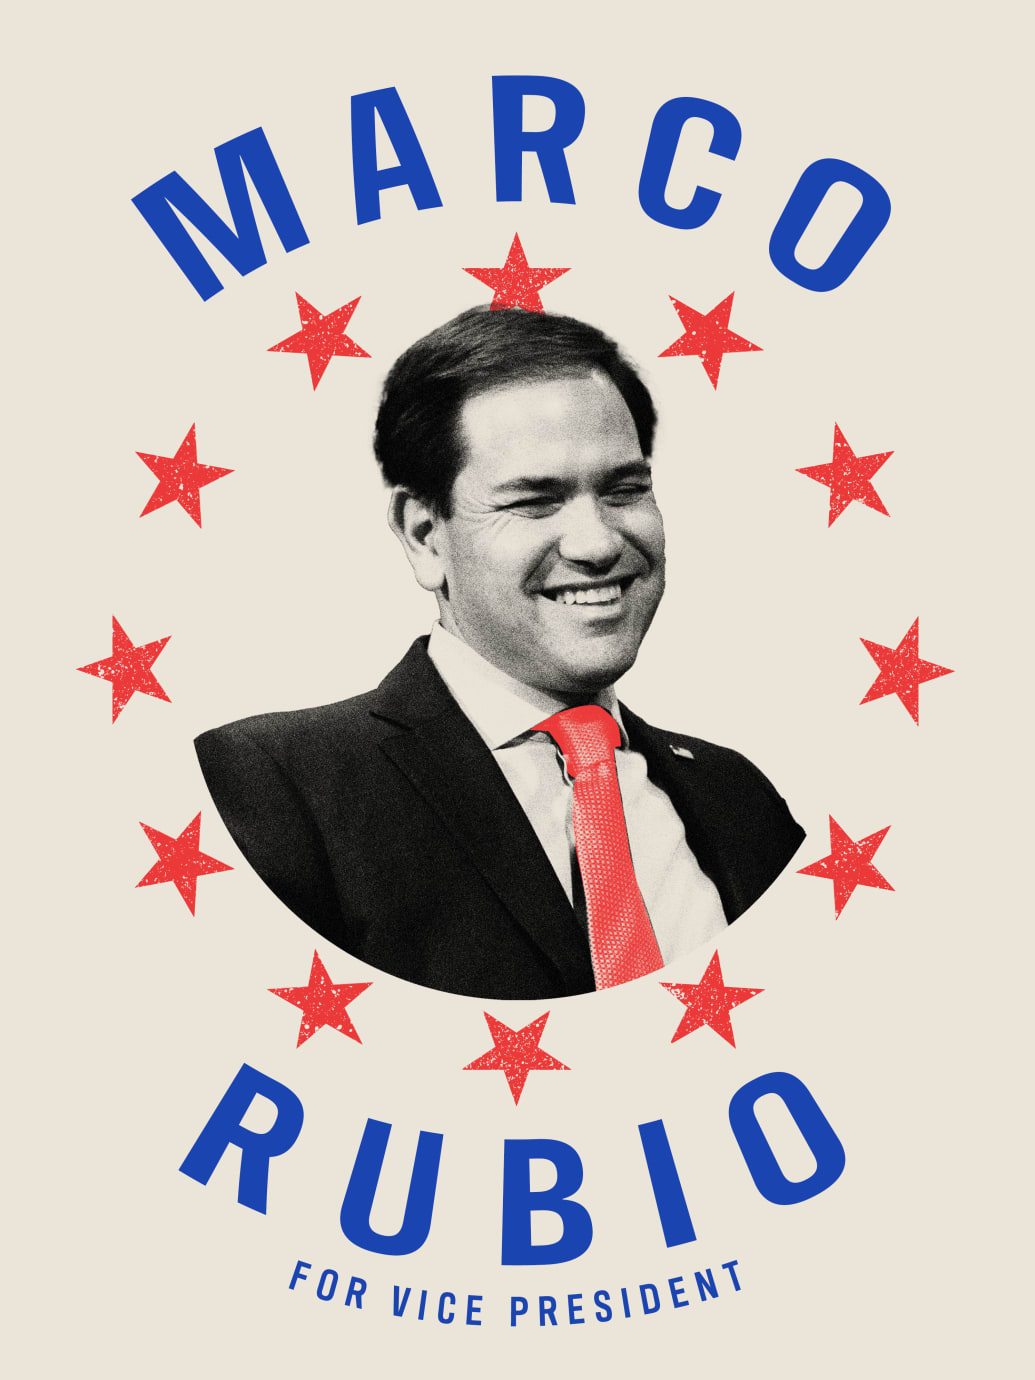 Vice Presidential campaign poster featuring Marco Rubio